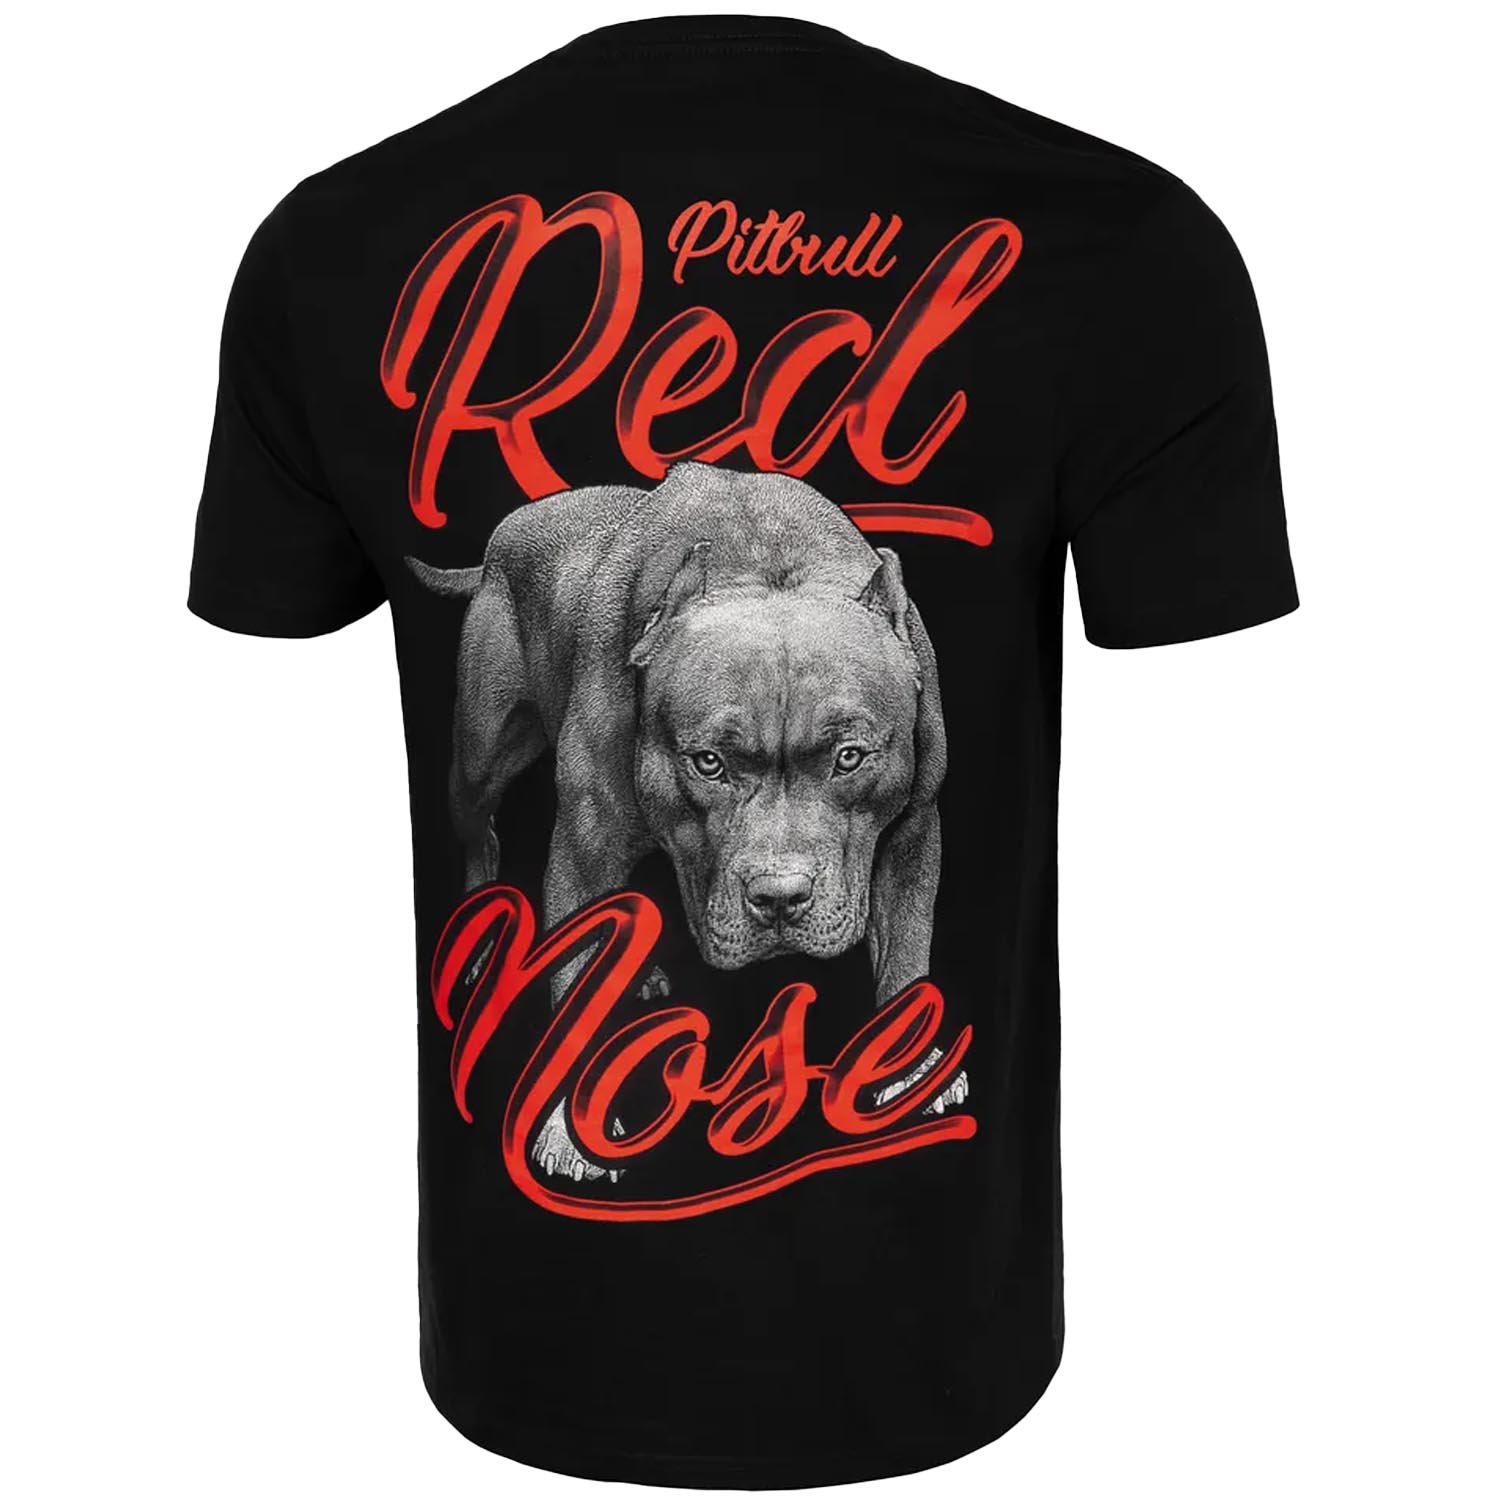 Pit Bull West Coast T-Shirt, Red Nose 23, black-red